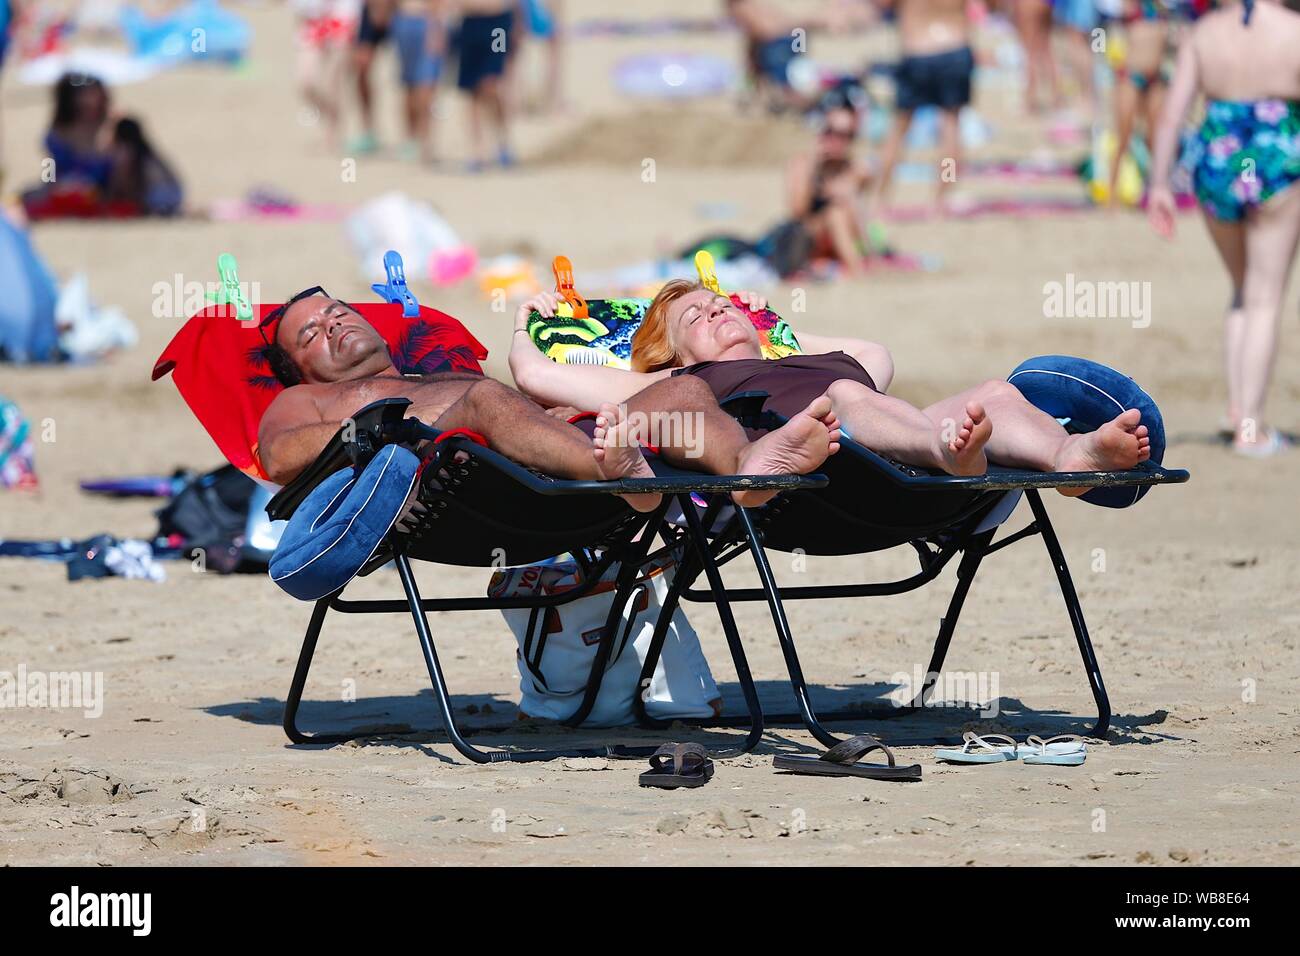 Camber, East Sussex, UK. 25 Aug, 2019. UK Weather: The hot sunshine beats down on a very busy Bank Holiday Weekend at the Camber Sands beach in East Sussex. ©Paul Lawrenson 2019, Photo Credit: Paul Lawrenson/Alamy Live News Stock Photo